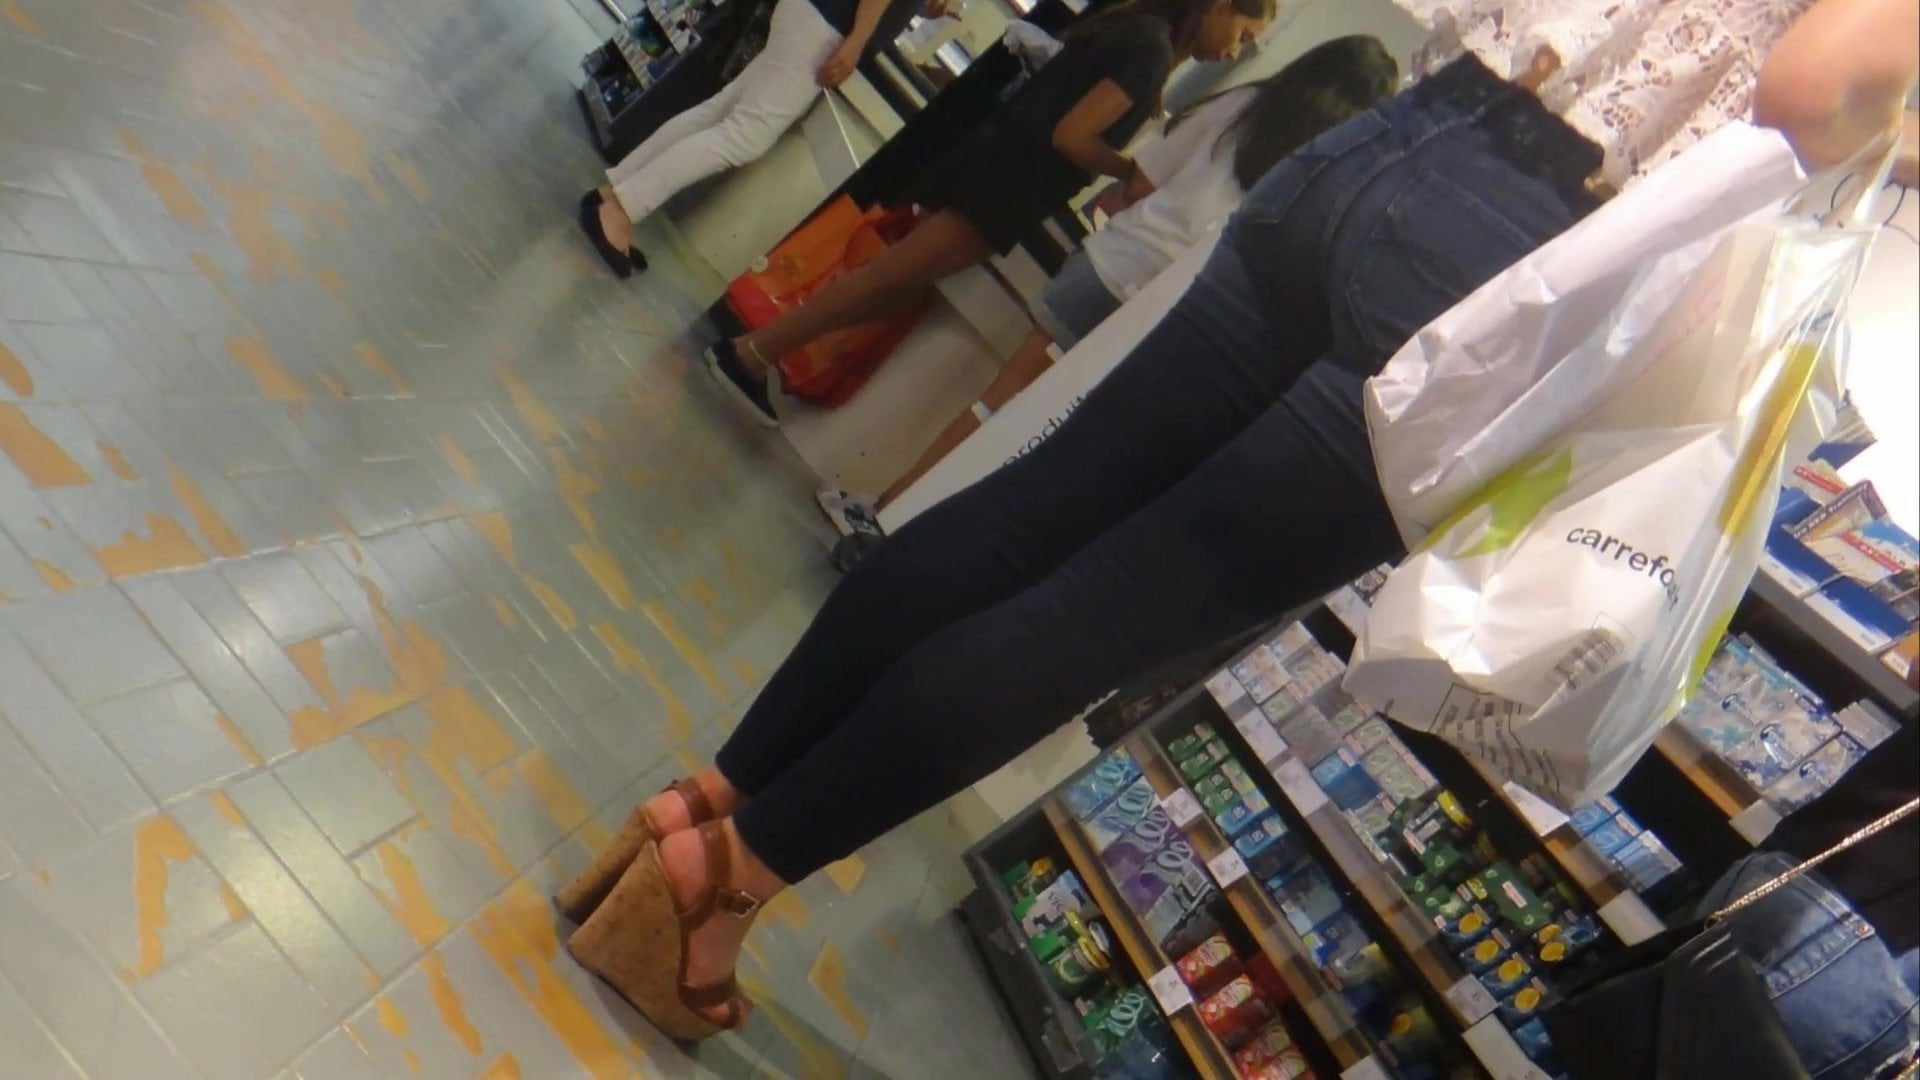 Candid hot brunette tight jeans and wedges heels